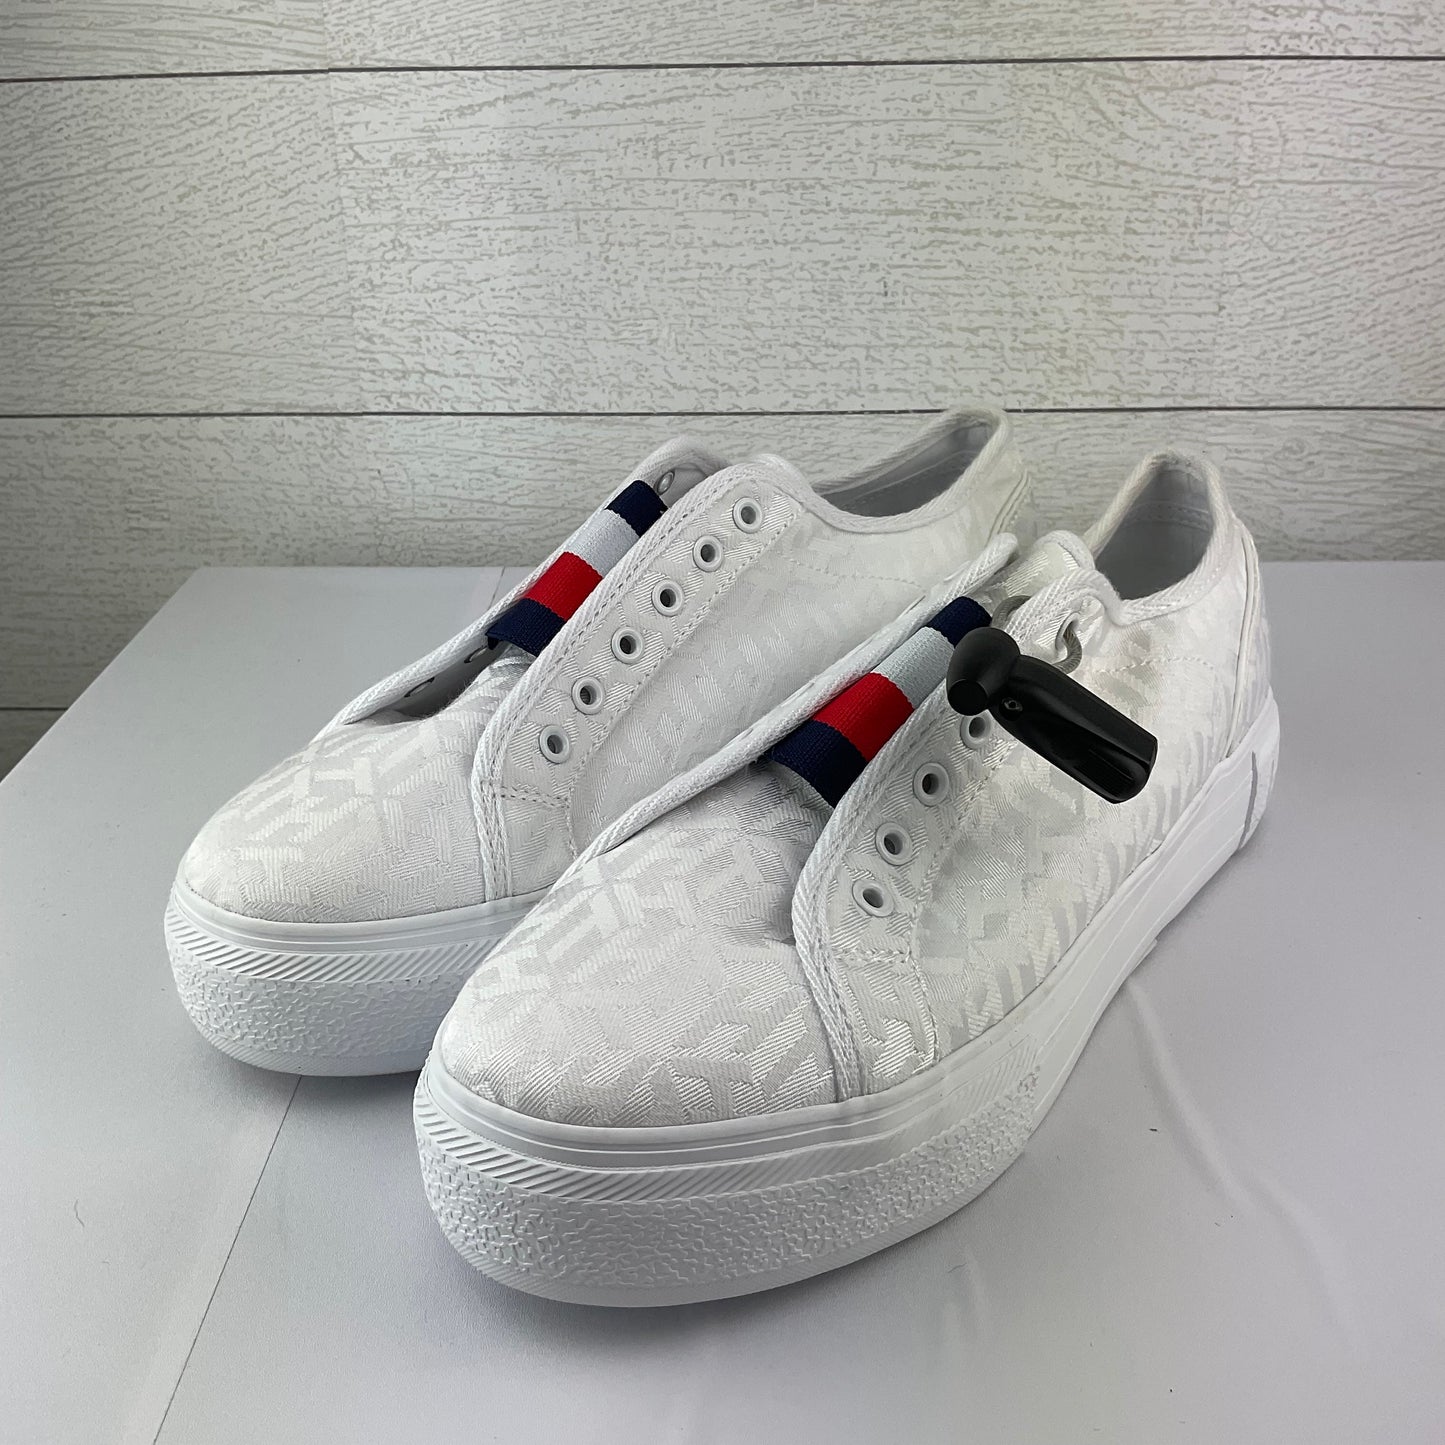 White Shoes Sneakers Tommy Hilfiger, Size 10